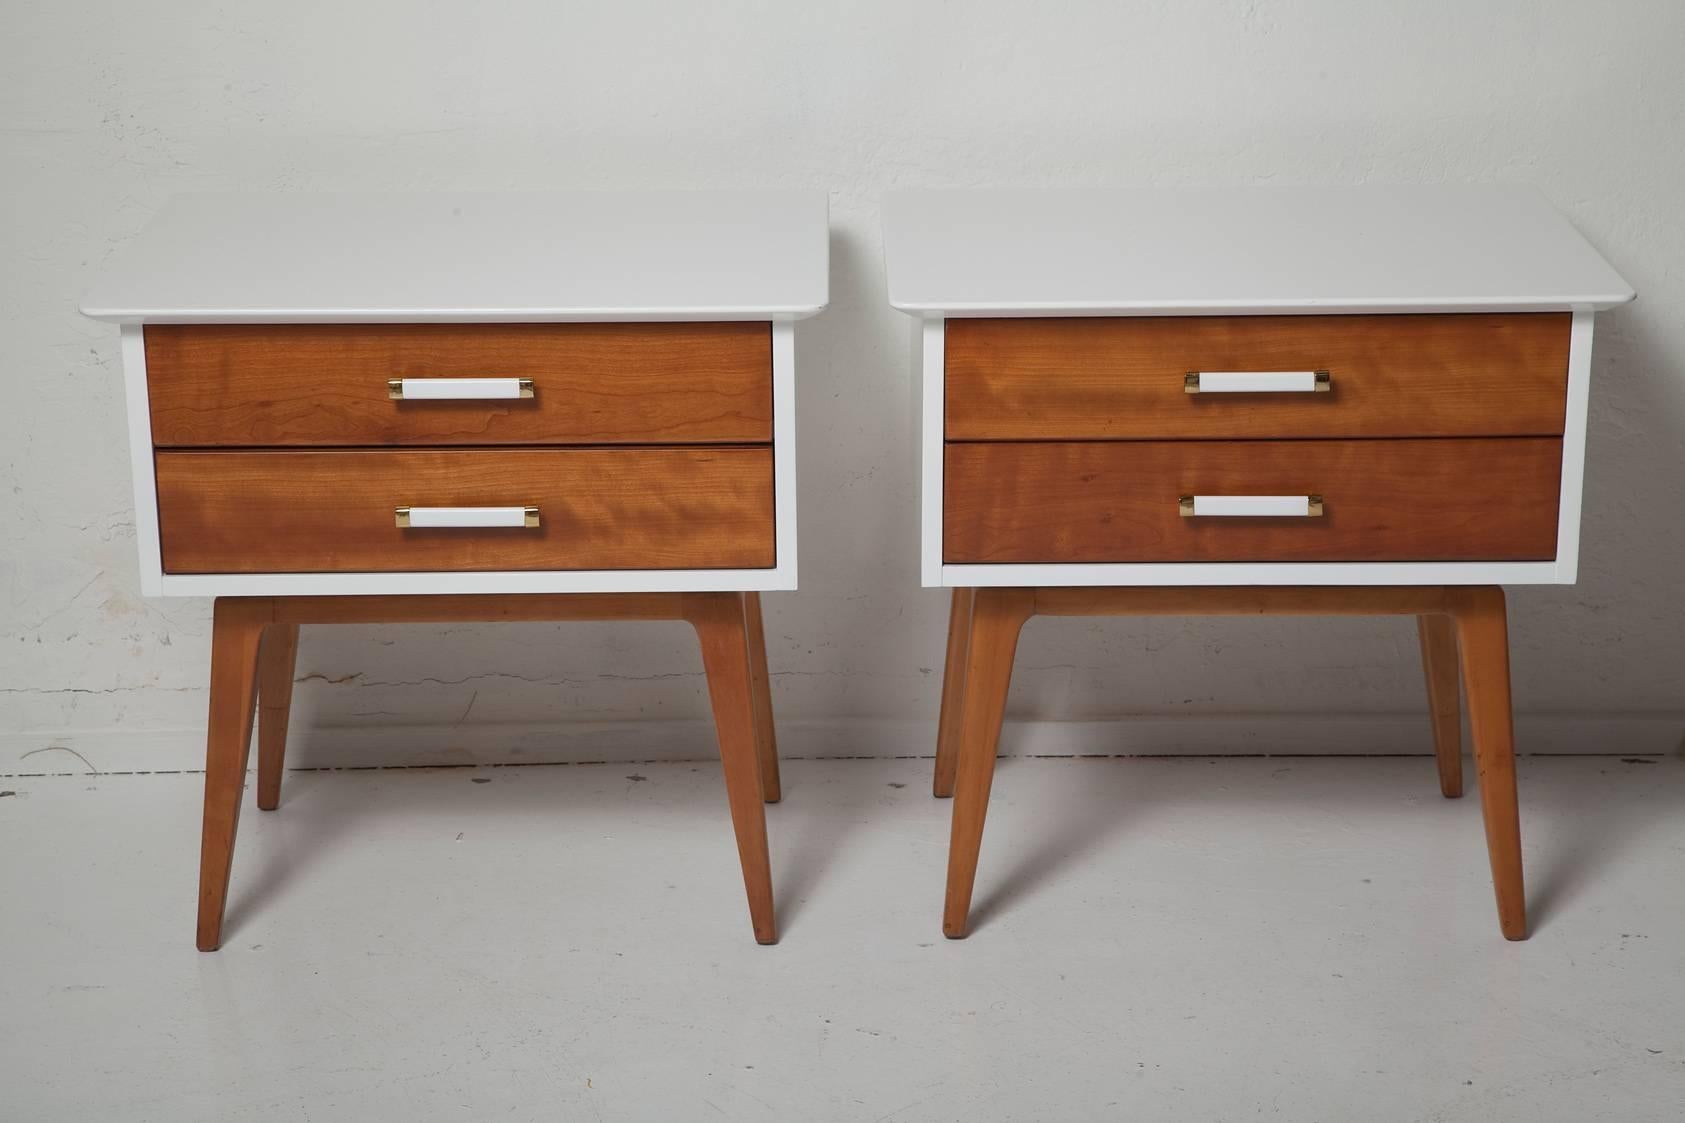 Fresh, fully restored pair of nightstands by Renzo Rutili have white lacquered bodies with contrasting cherrywood drawer fronts, legs, and handles with polished brass trim, circa 1955.